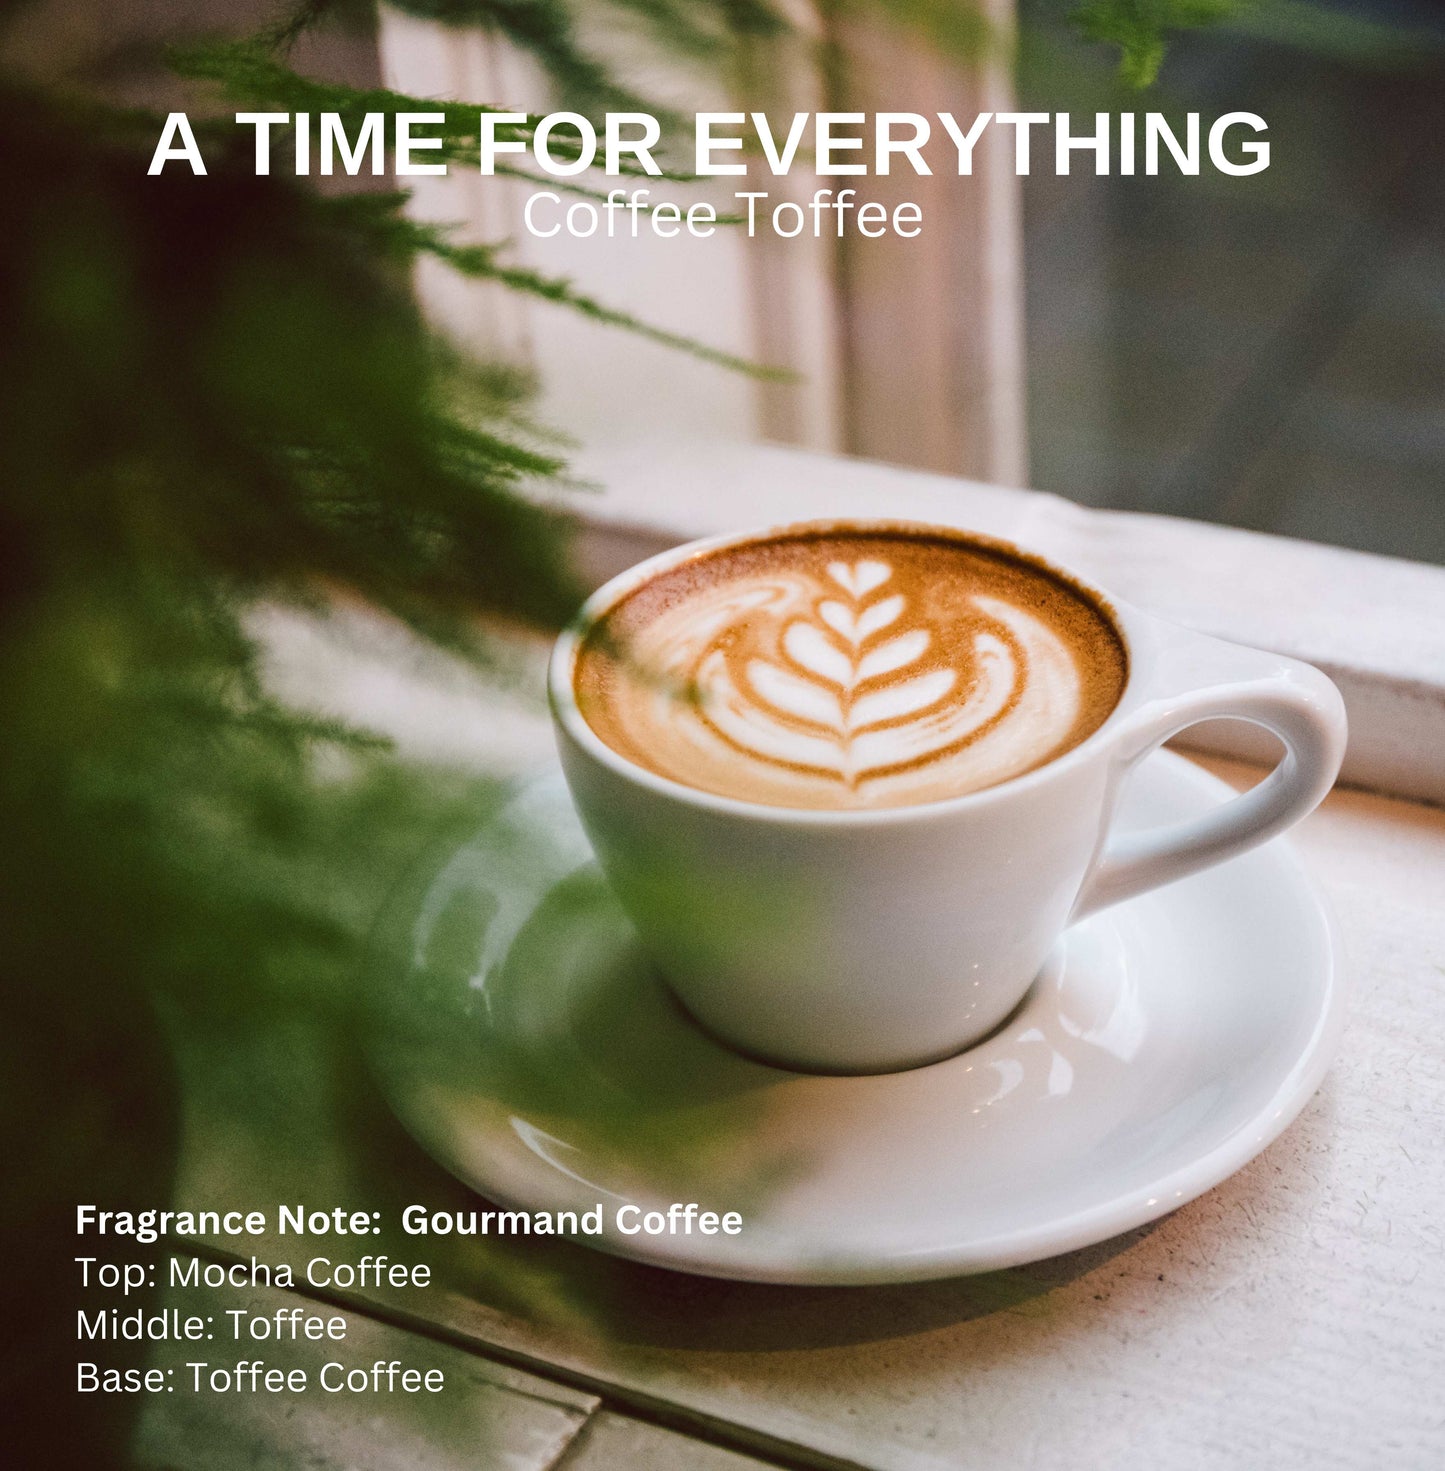 A TIME FOR EVERYTHING  -COFFEE TOFFEE